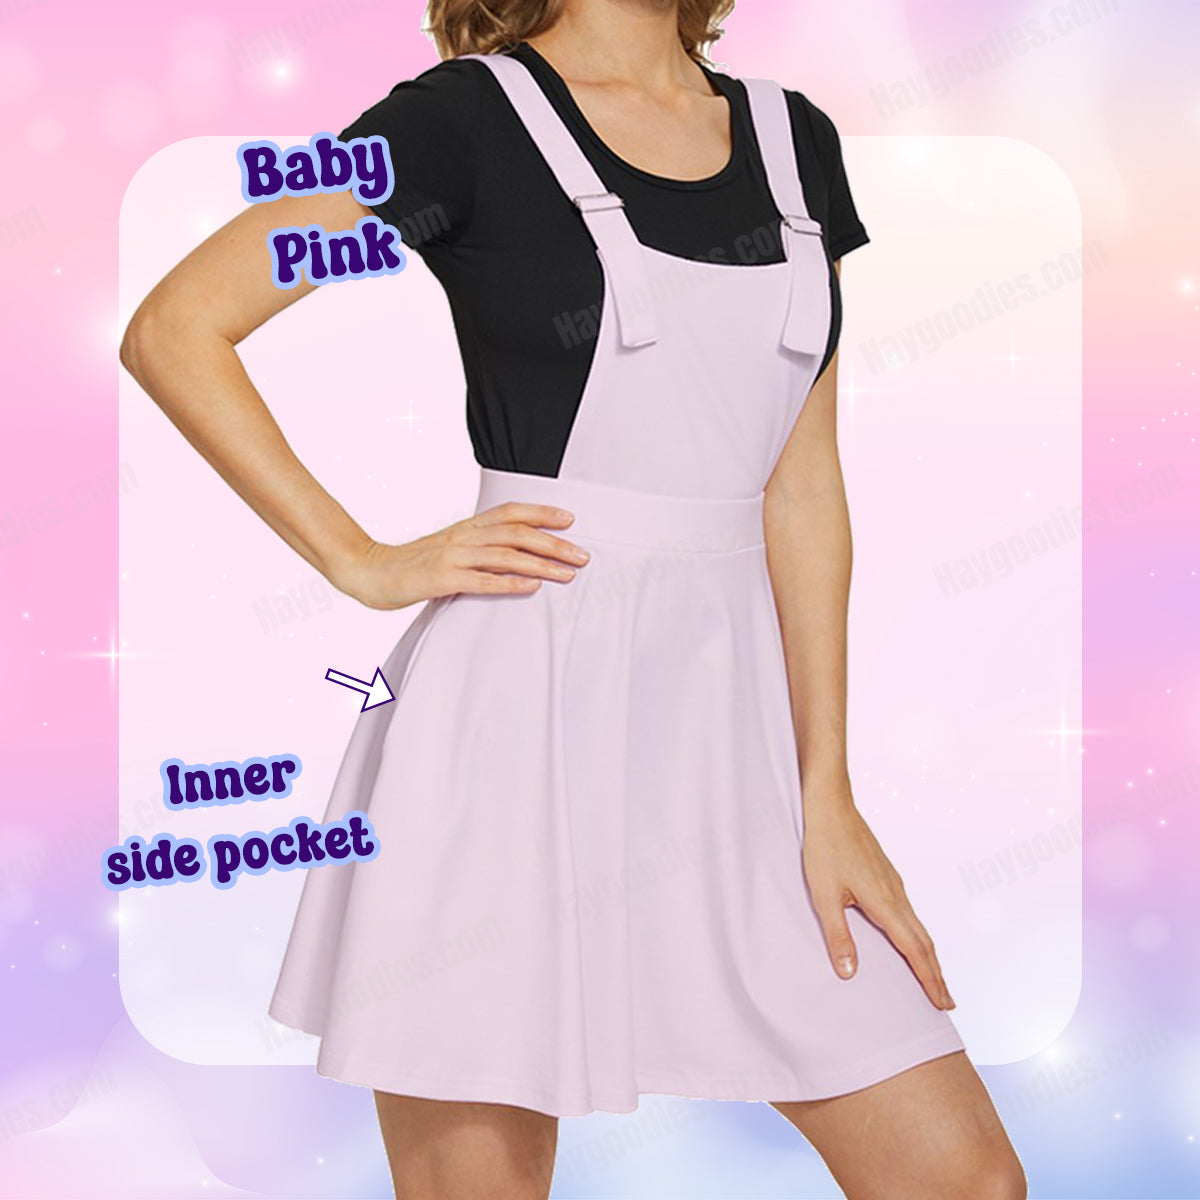 Baby Pink Overalls Dress-XS to 5XL